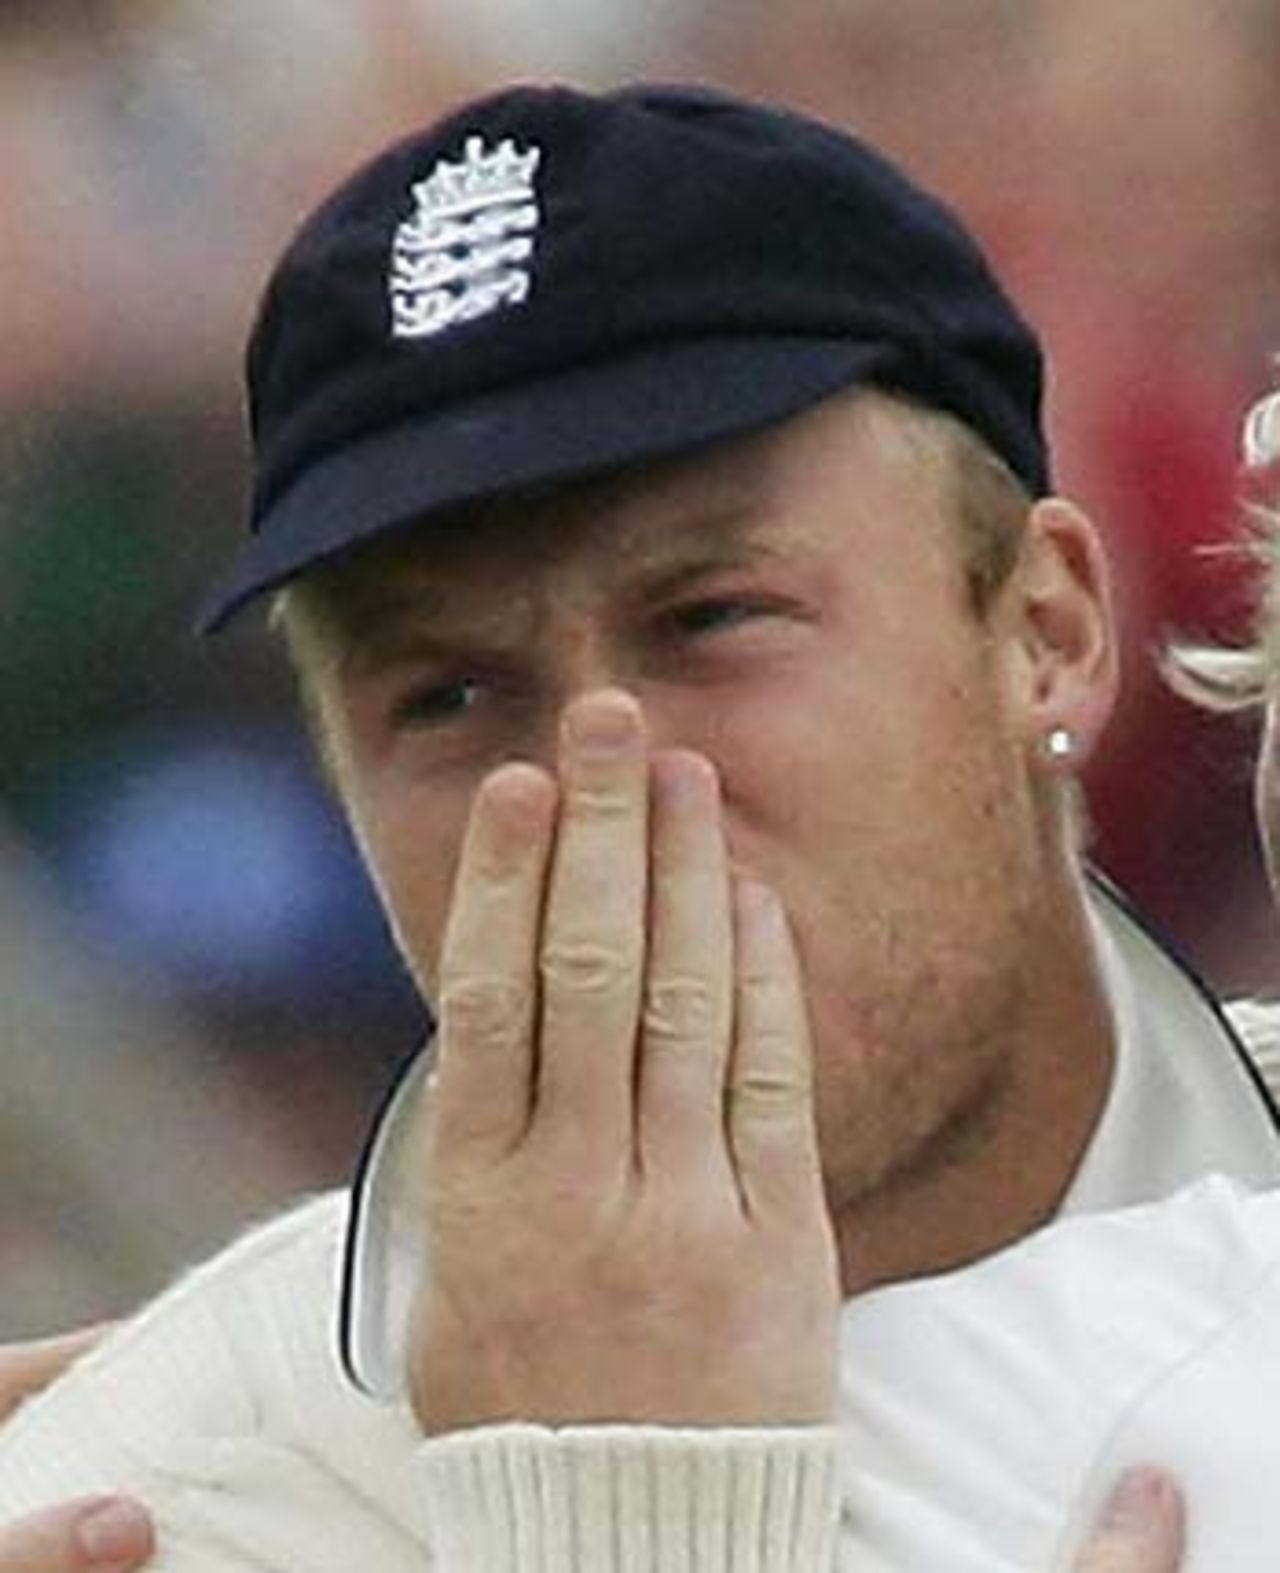 Andrew Flintoff takes a blow to the nose after some overenthusiastic high fives, England v Australia, 3rd Test, Old Trafford, August 15, 2005